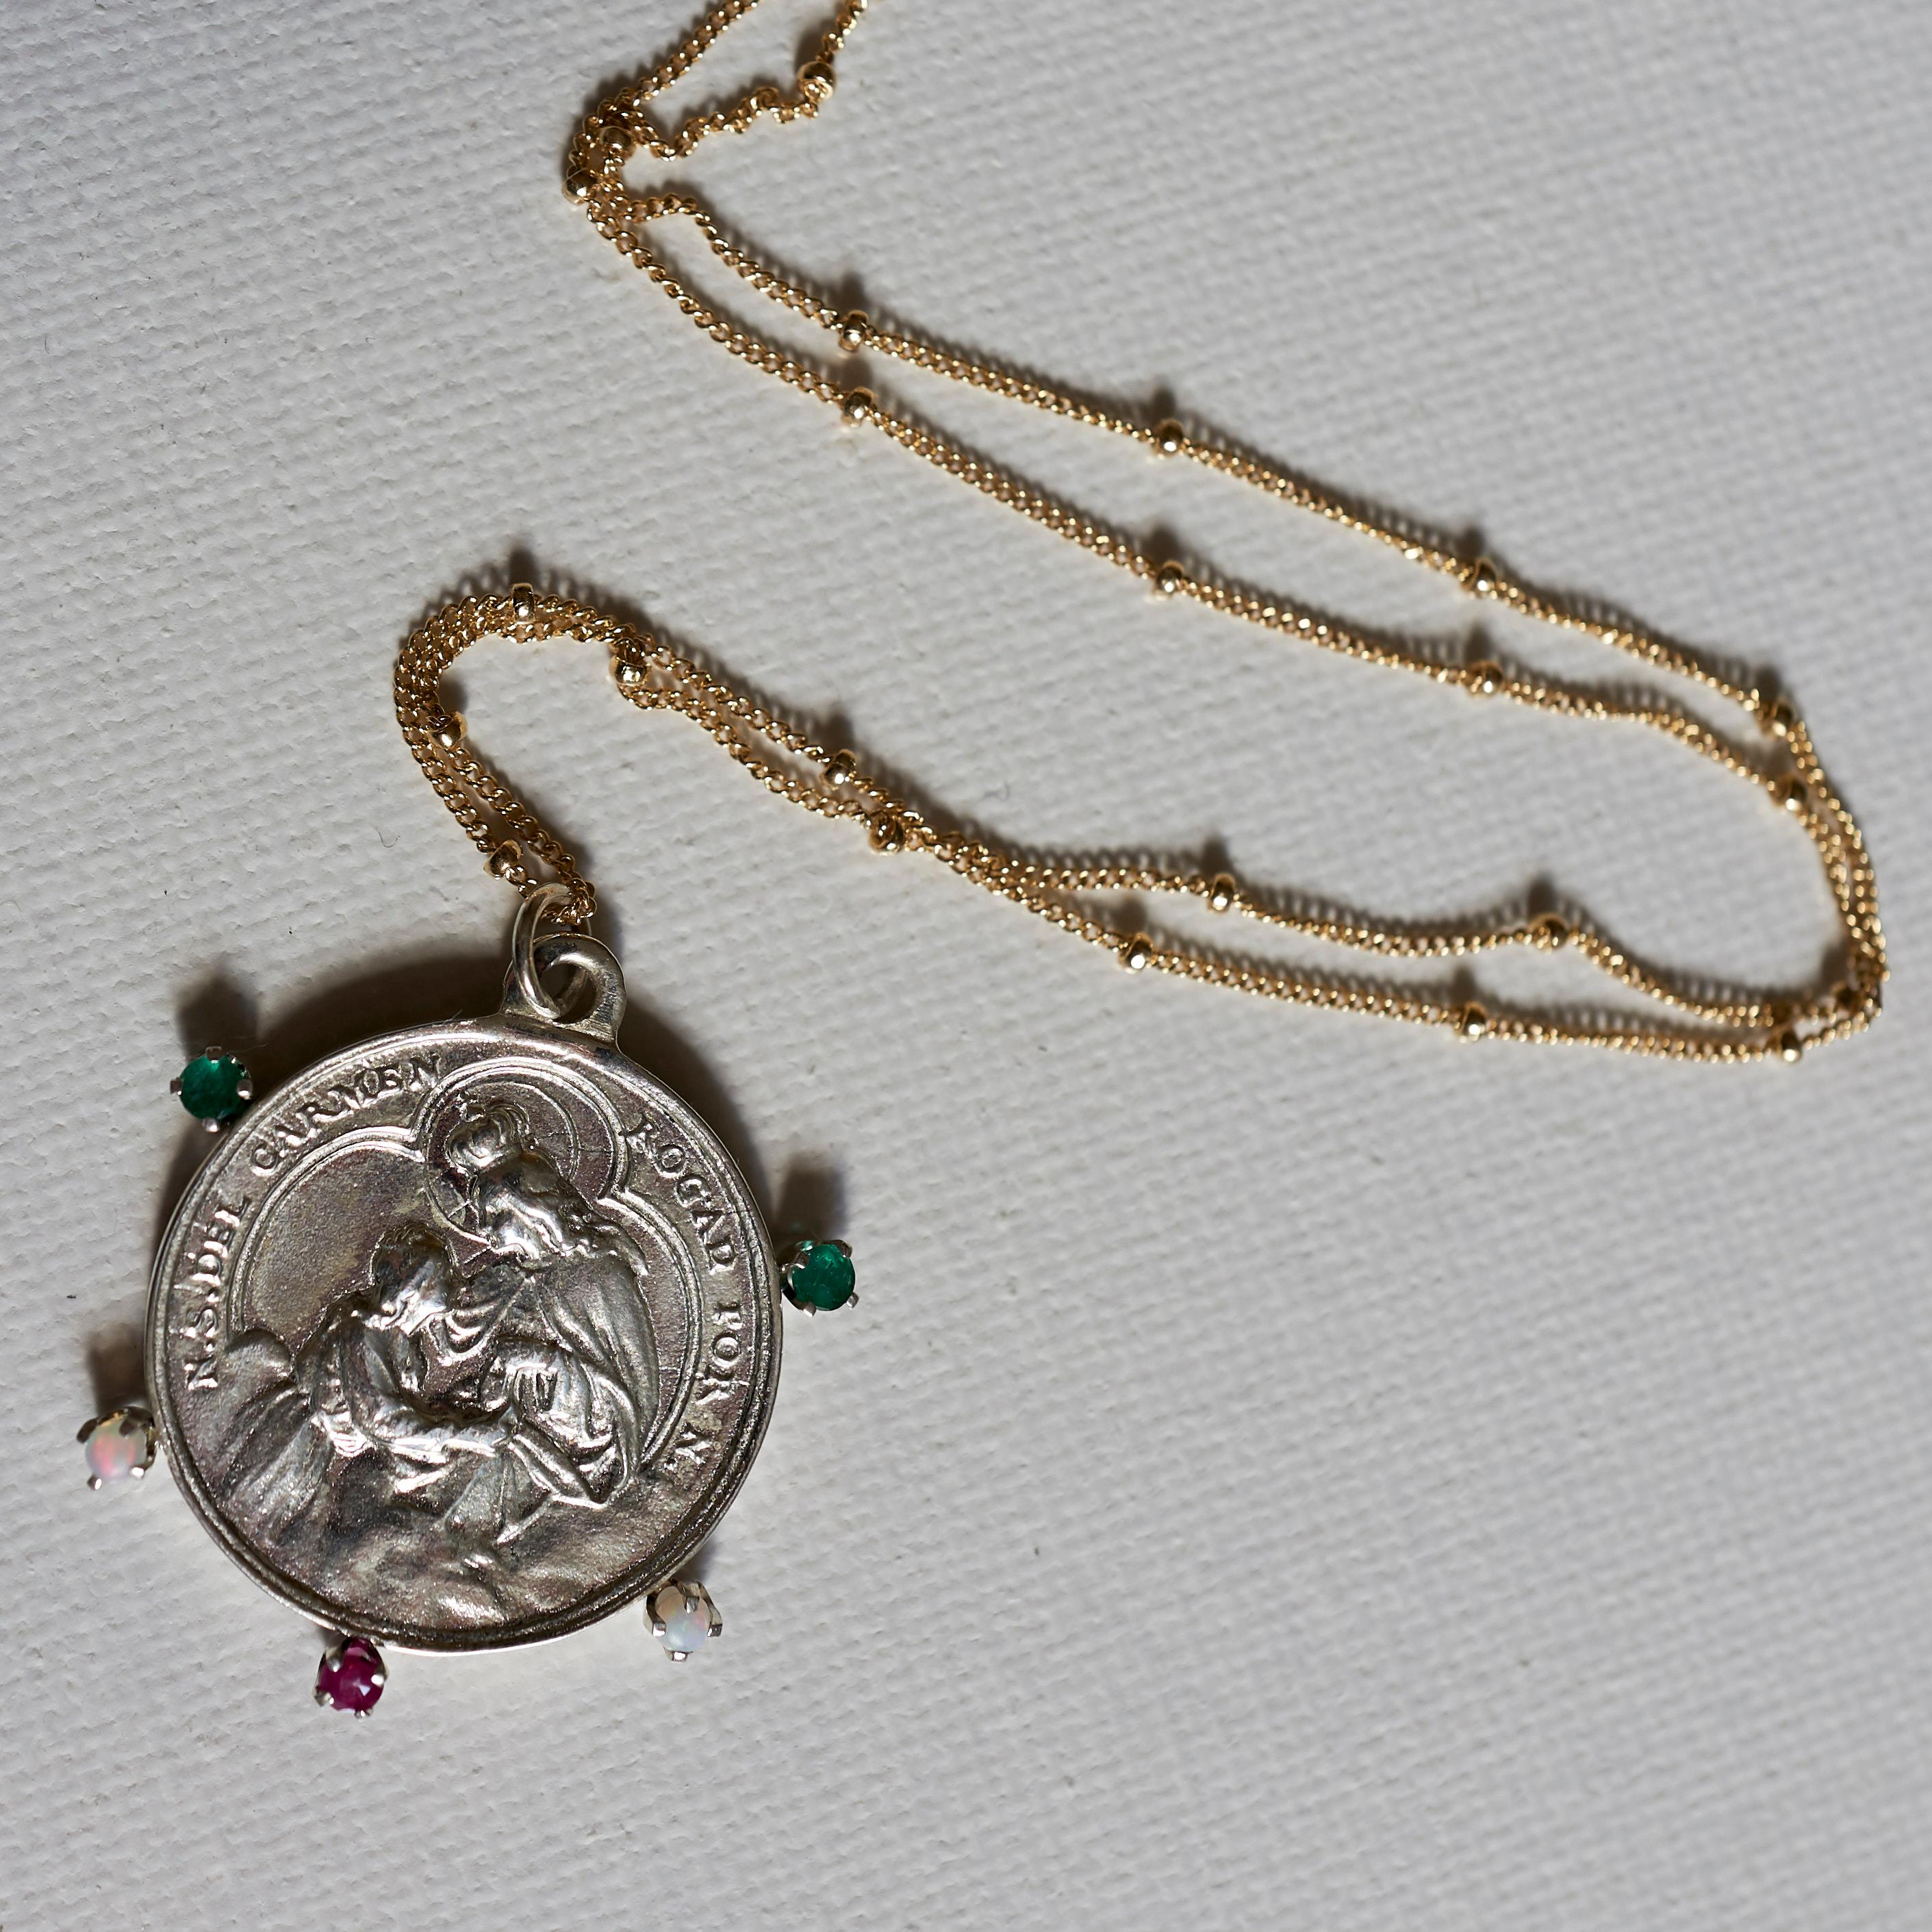 Emerald Ruby Opal Virgin Mary Medal Necklace Silver Pendant Gold Filled Chain J In New Condition For Sale In Los Angeles, CA